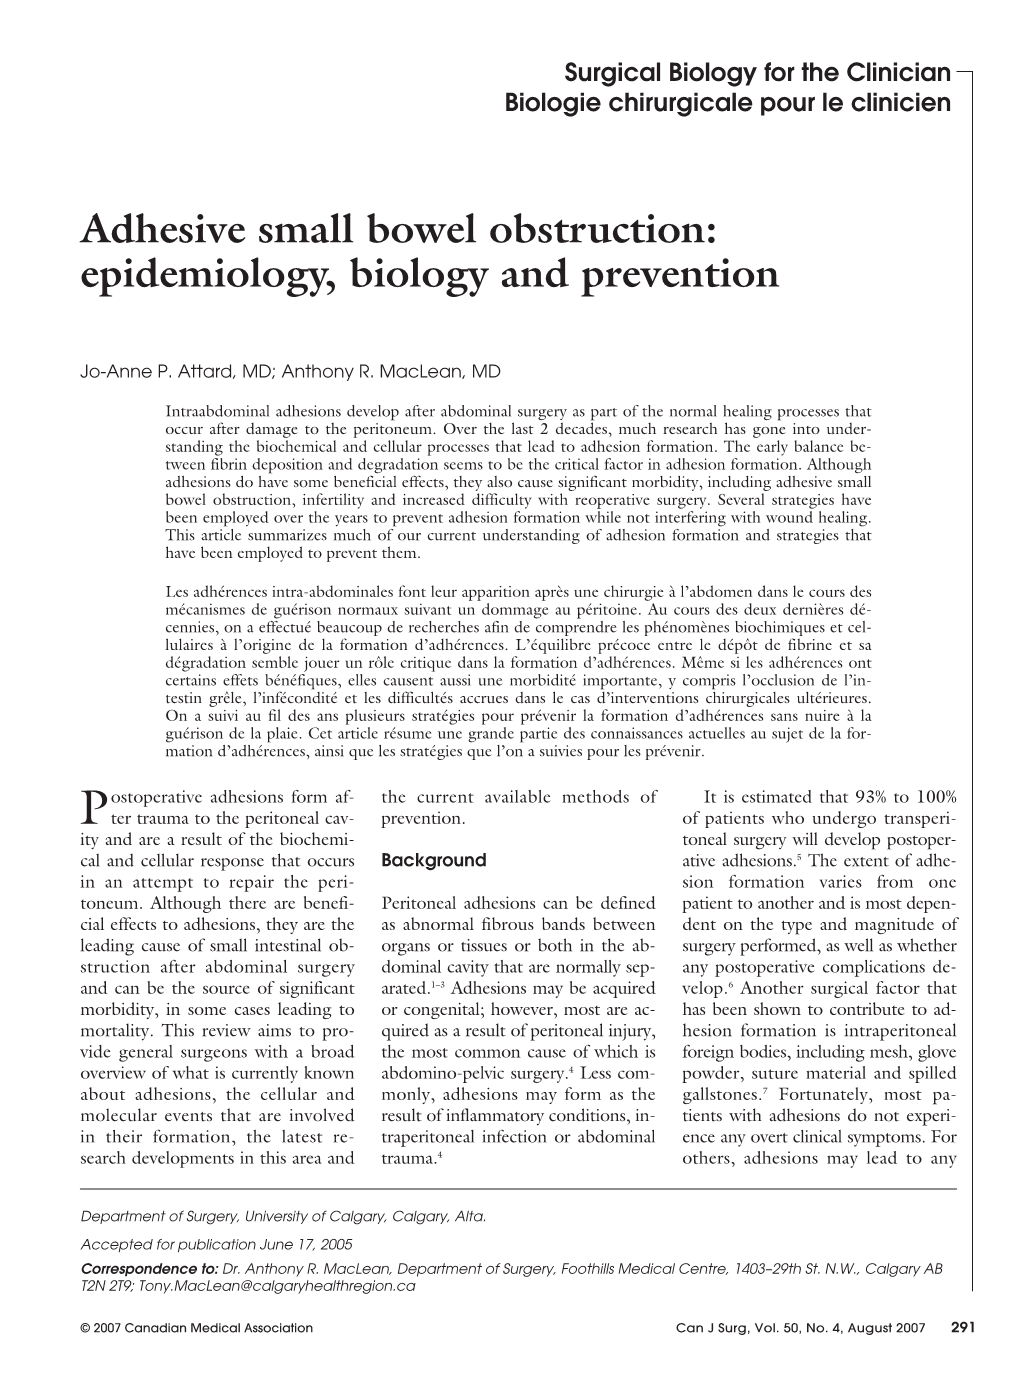 Adhesive Small Bowel Obstruction: Epidemiology, Biology and Prevention